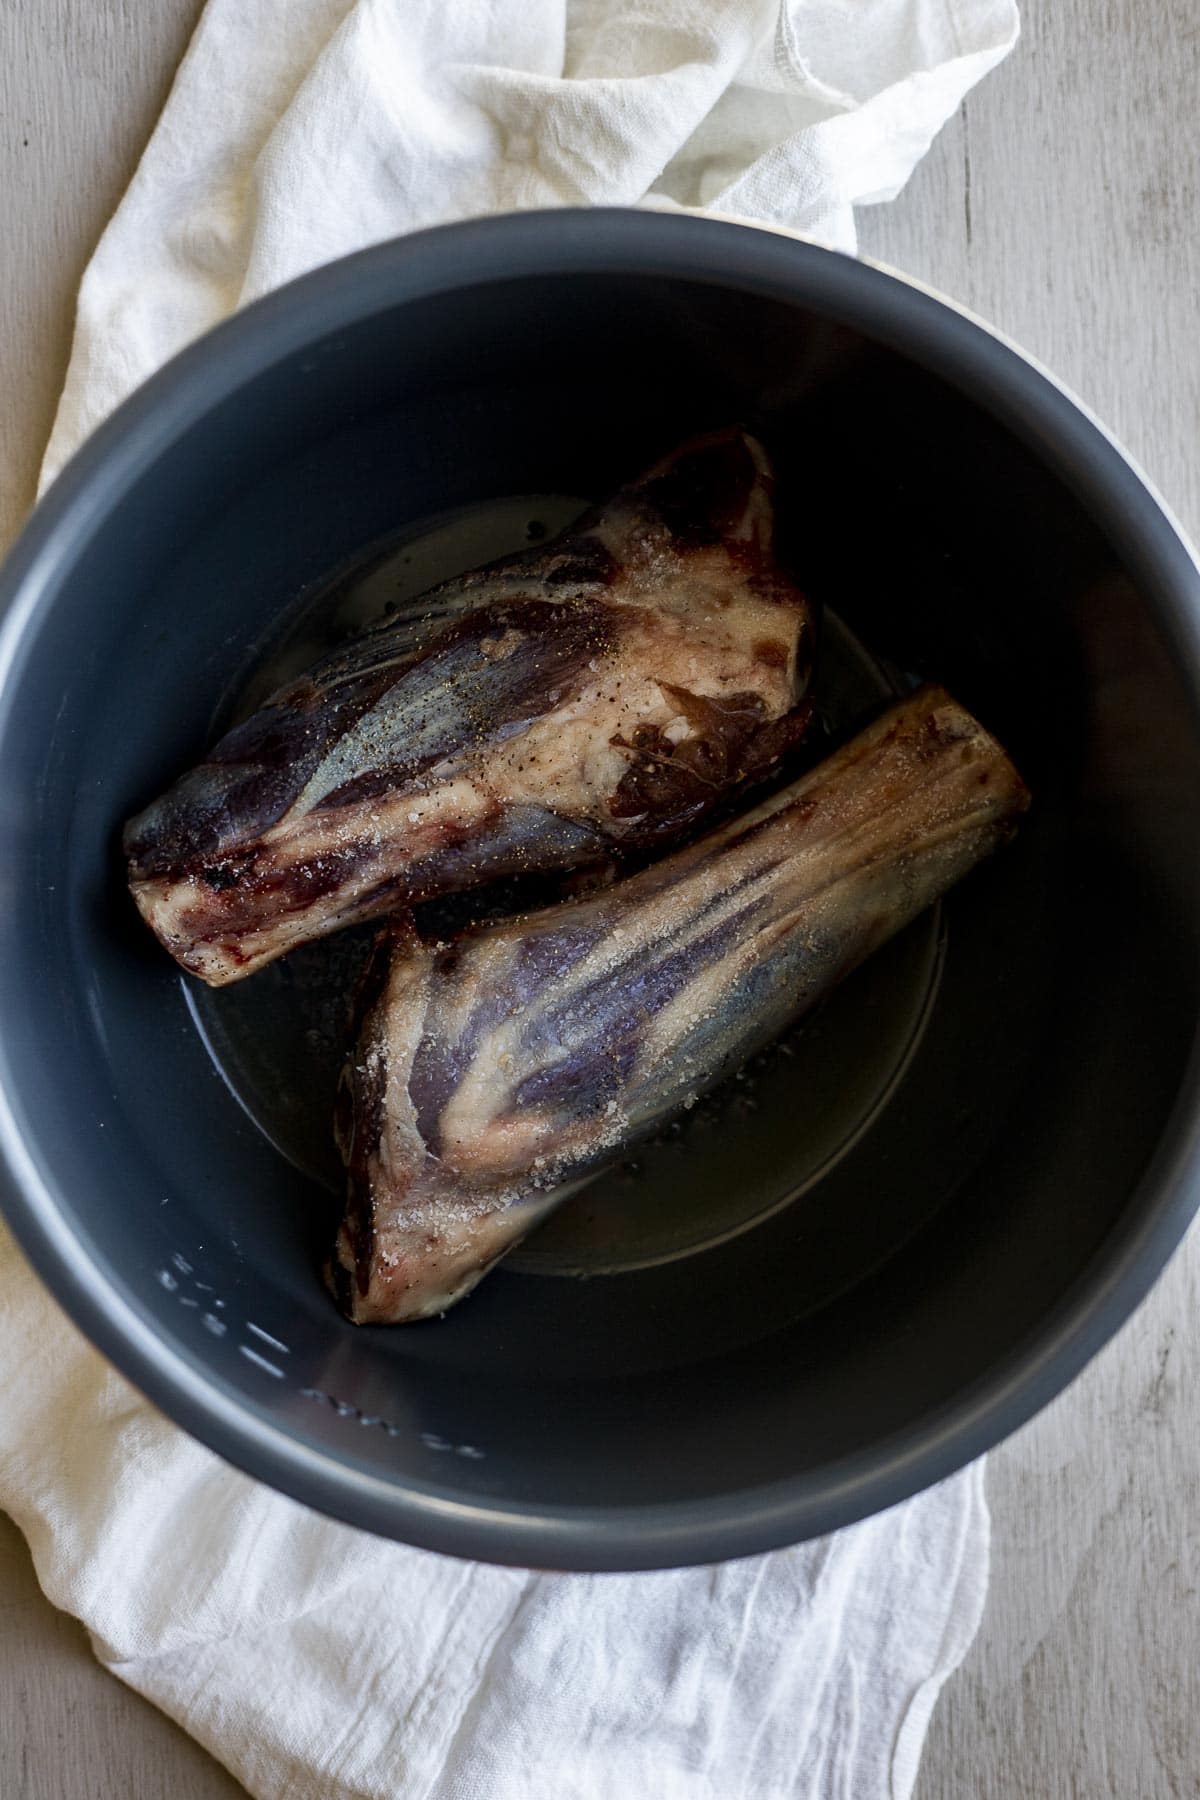 Two lamb shanks being browned in the Instant Pot.